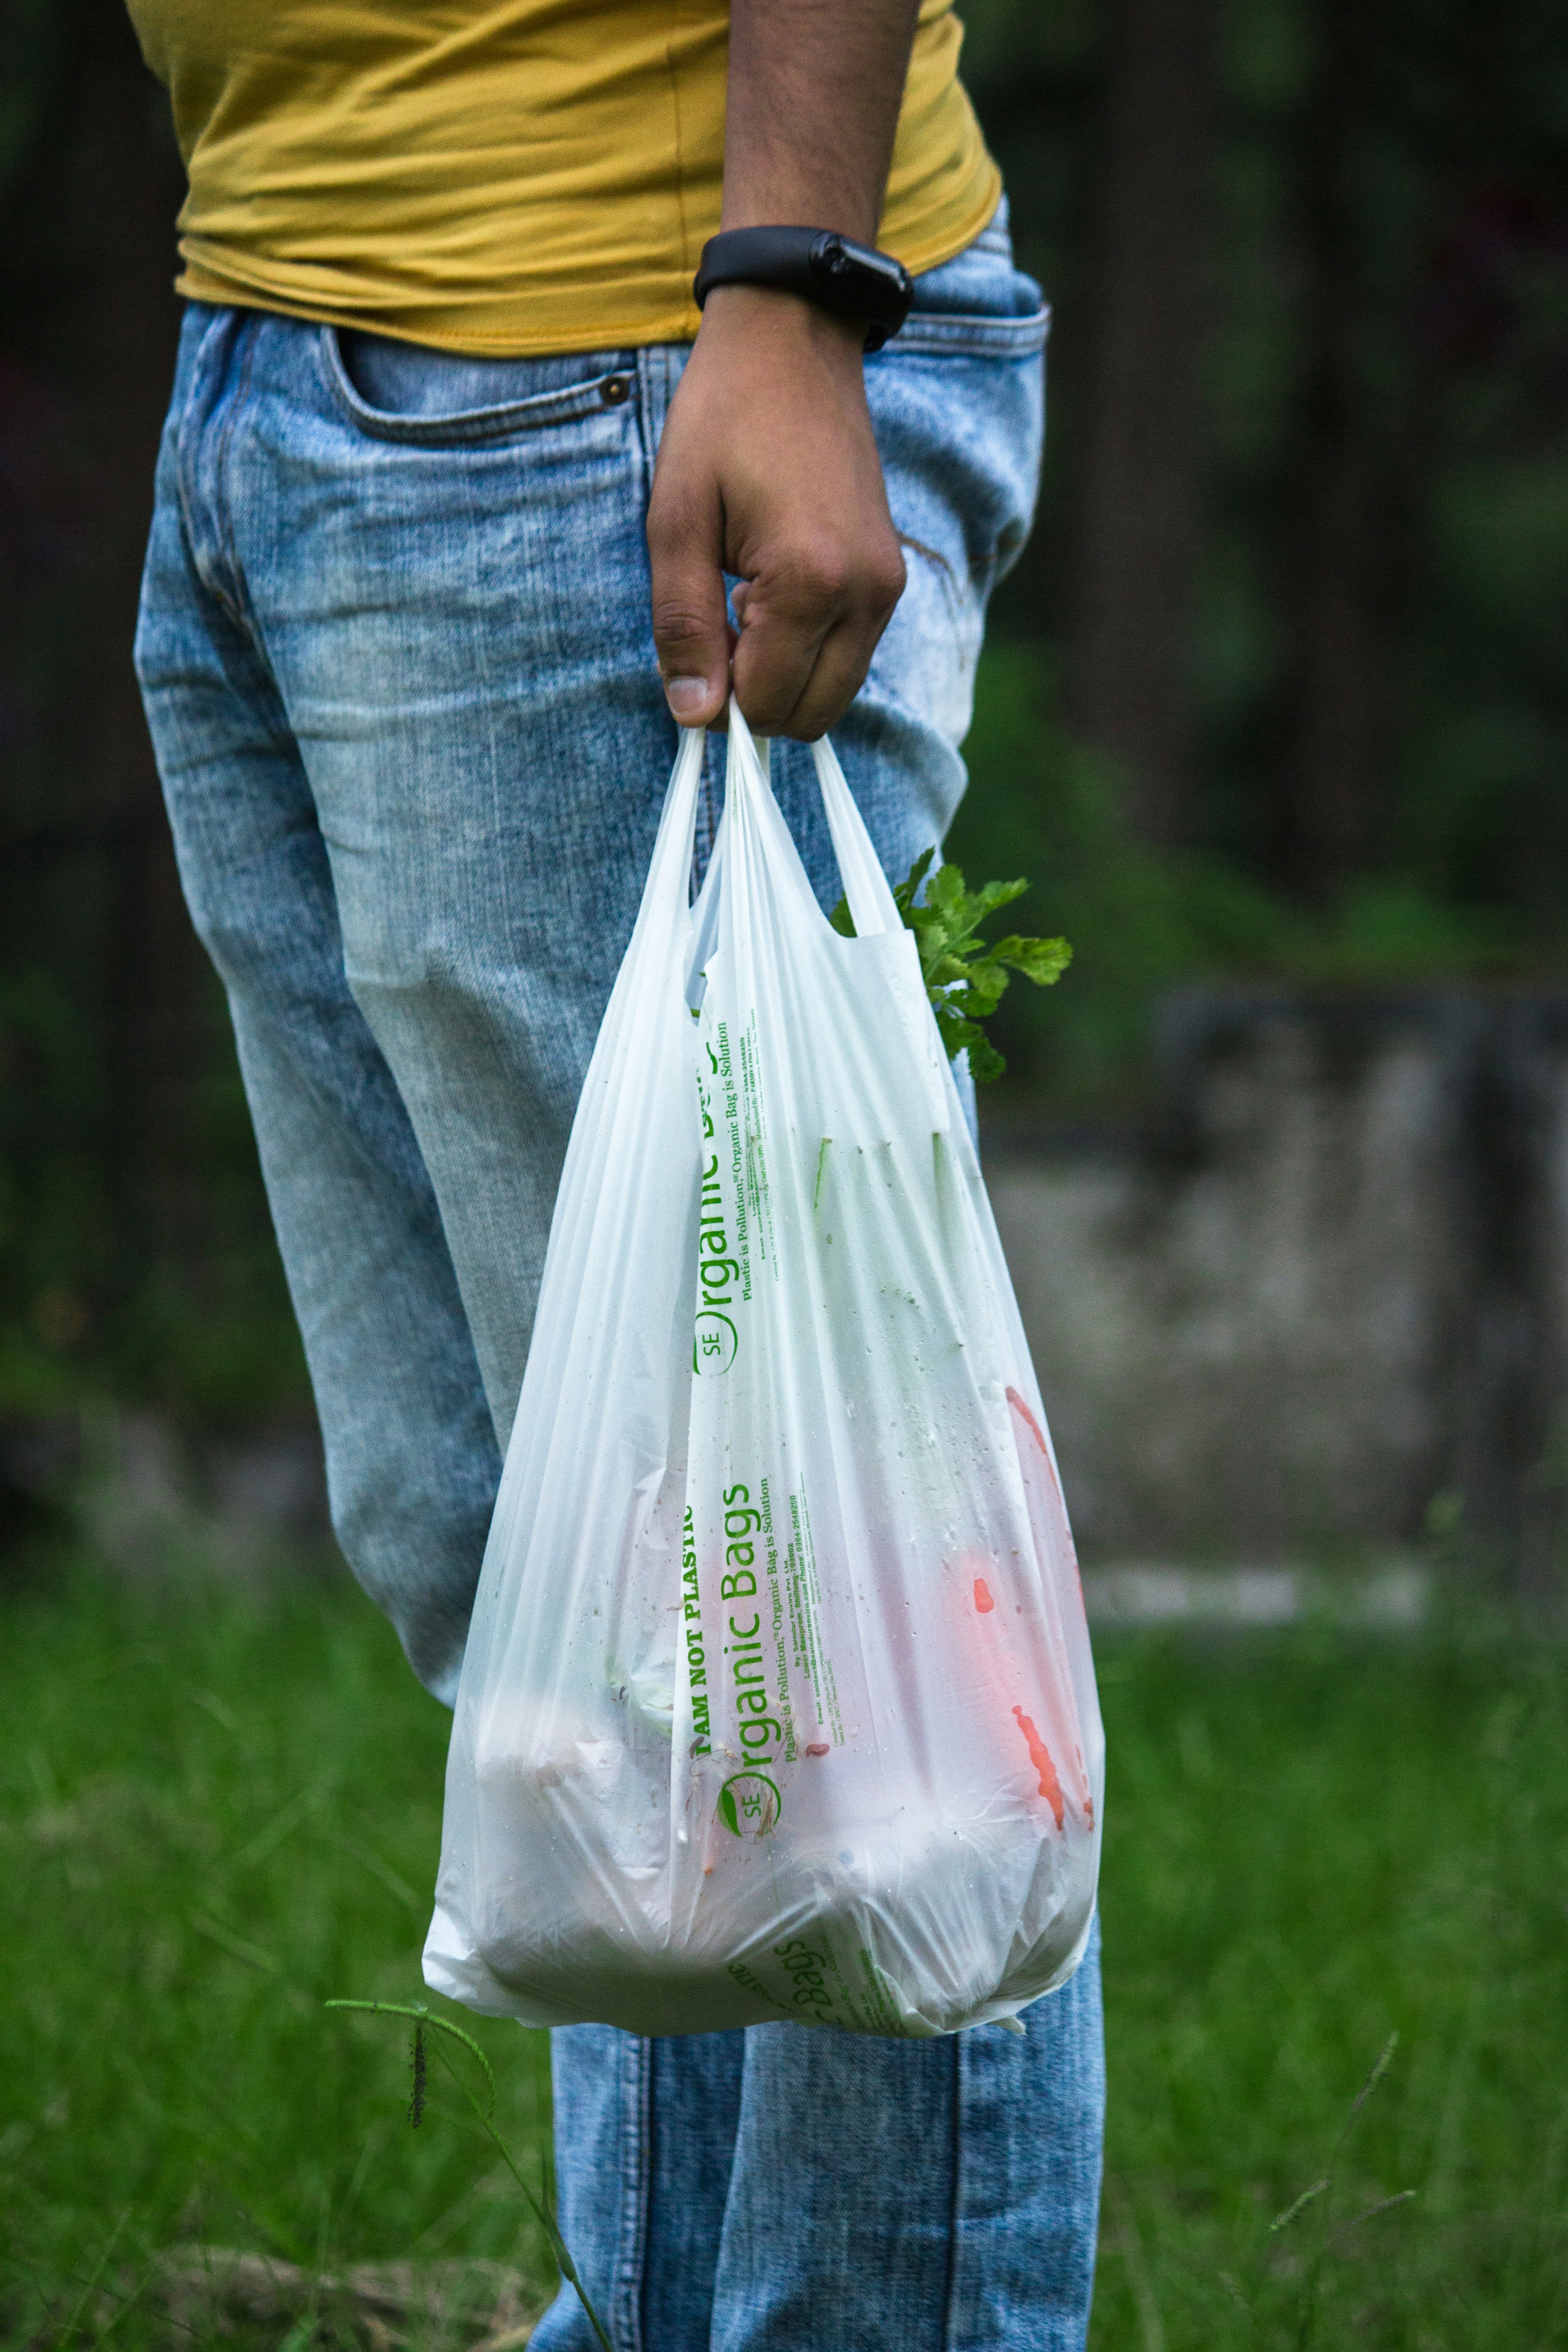 Alternatives to Plastic Bags